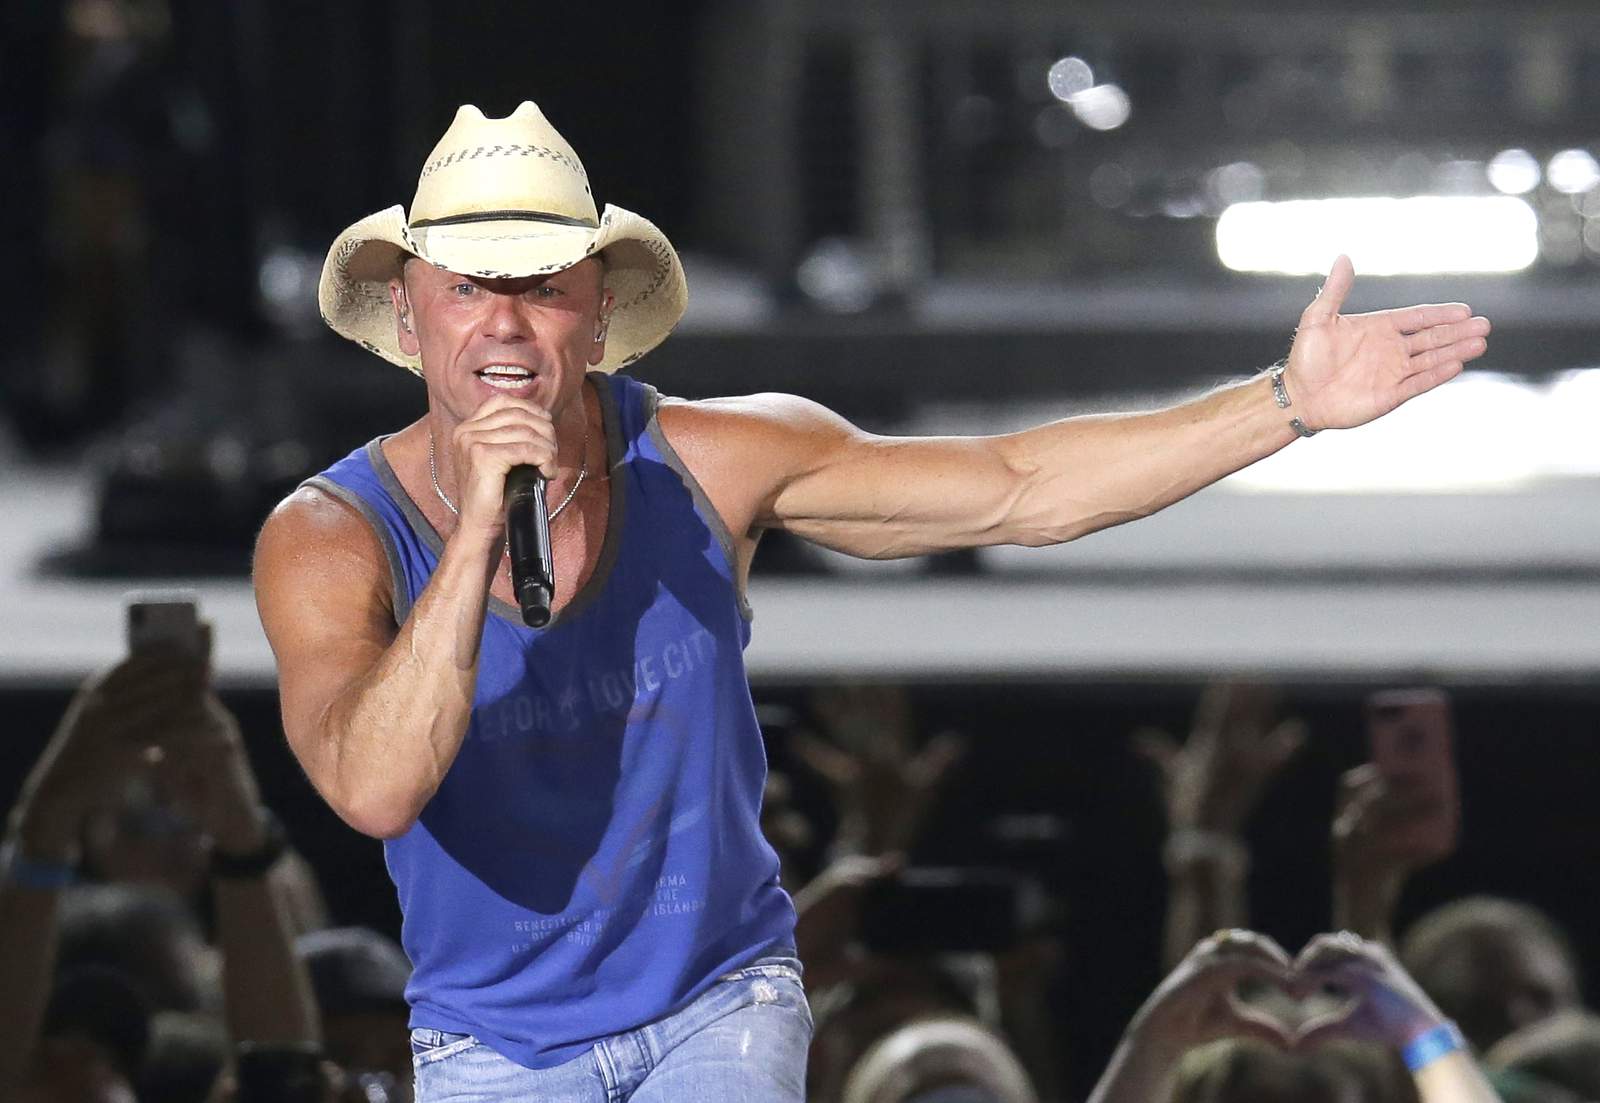 Kenny Chesney group helps install artificial reef in Florida